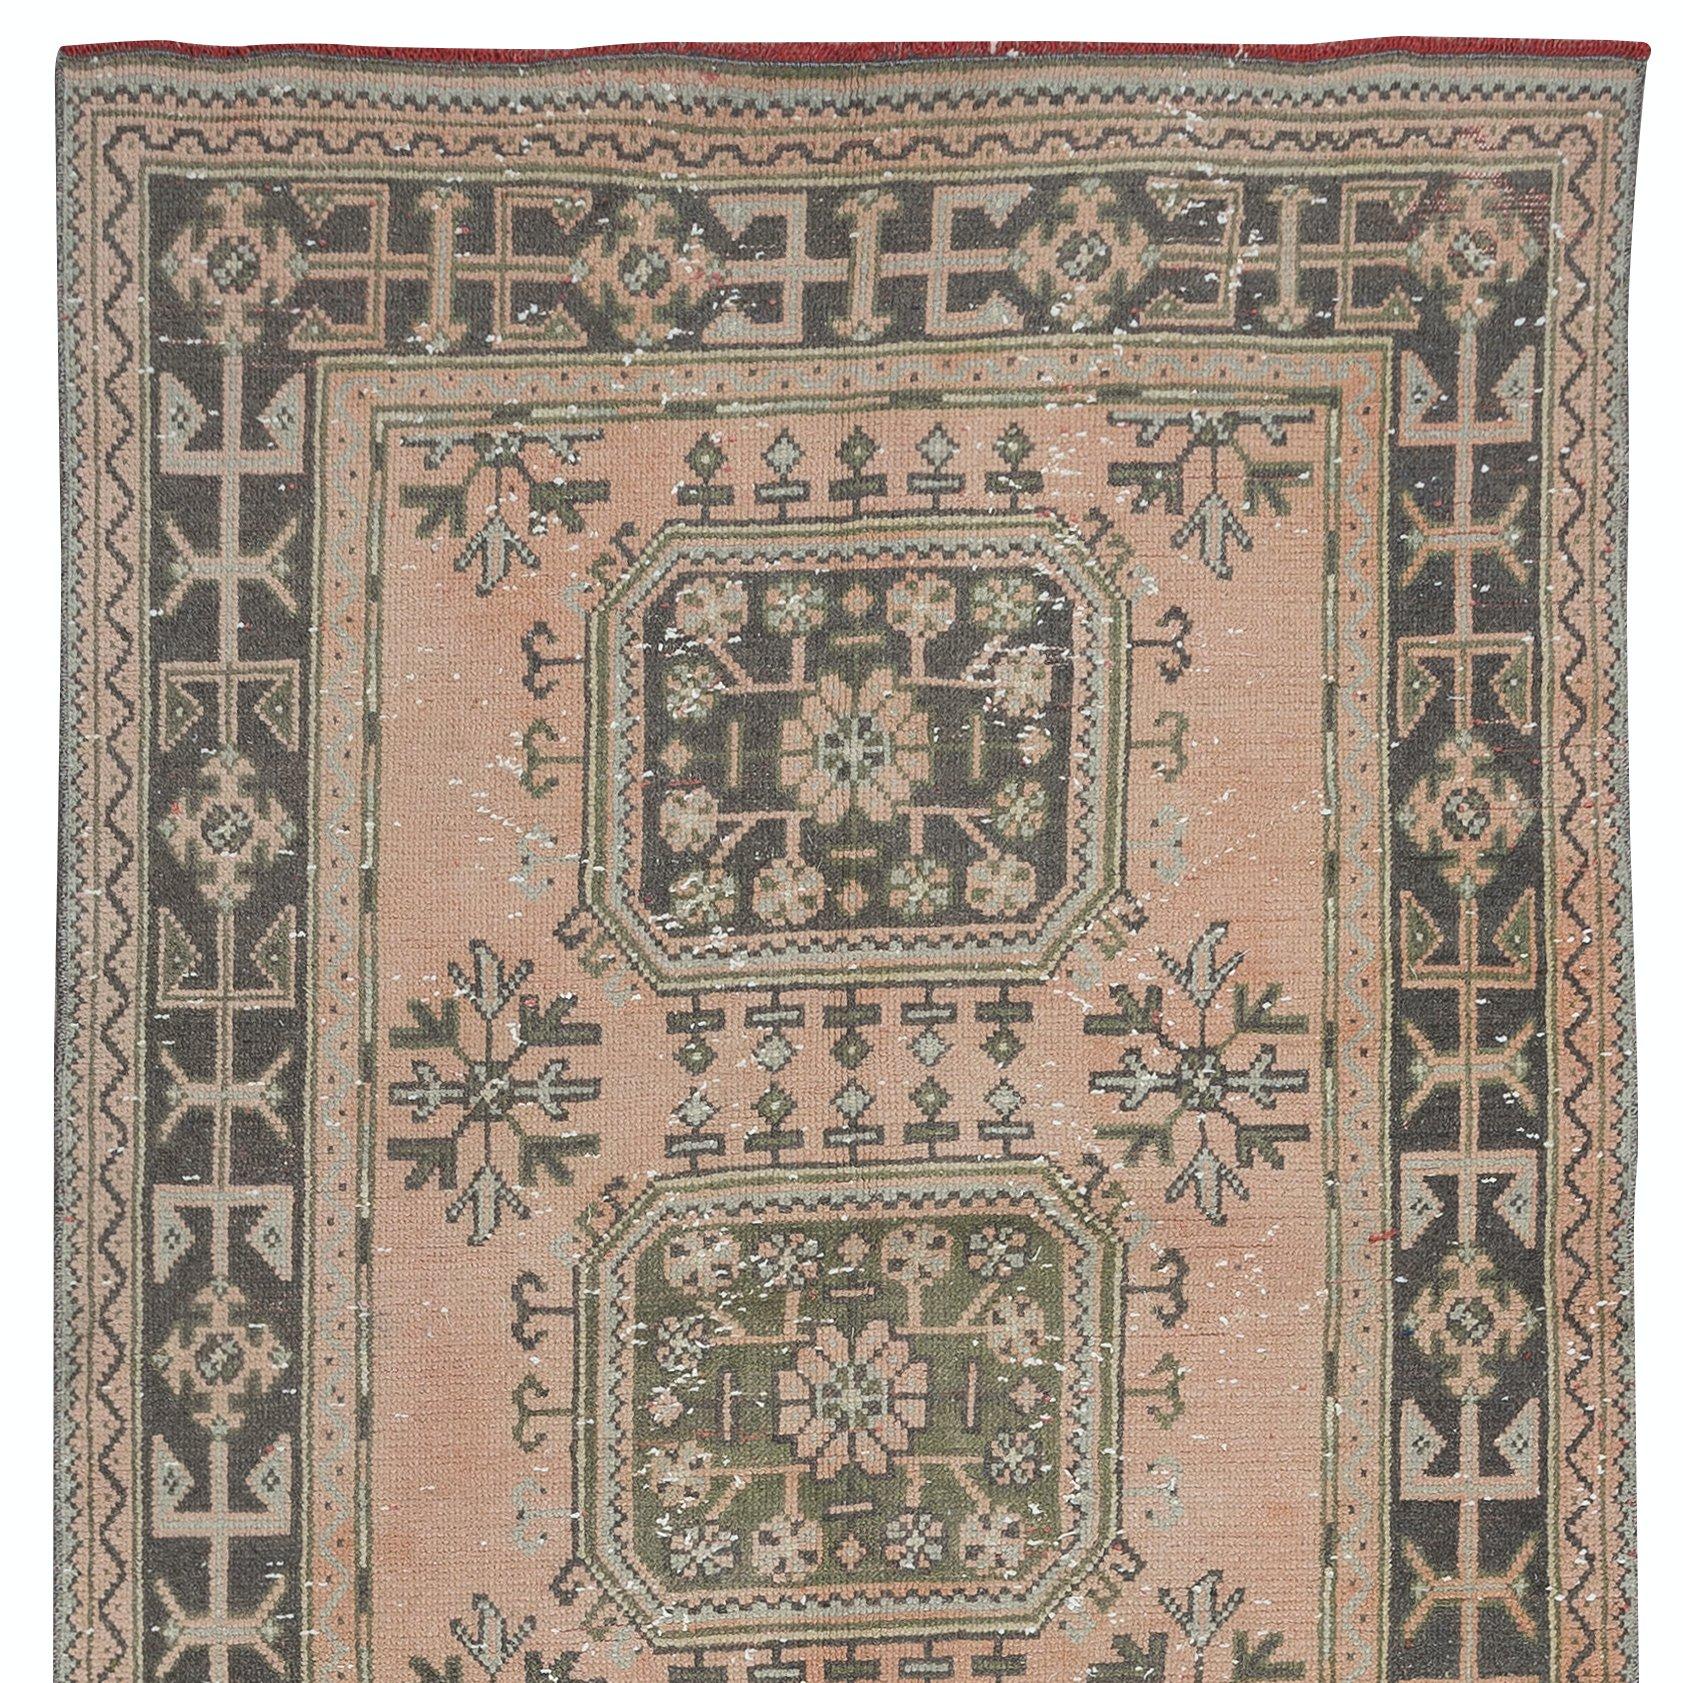 Turkish 4.5x11 Ft Hand Knotted Runner Rug for Hallway, Vintage Anatolian Corridor Carpet For Sale